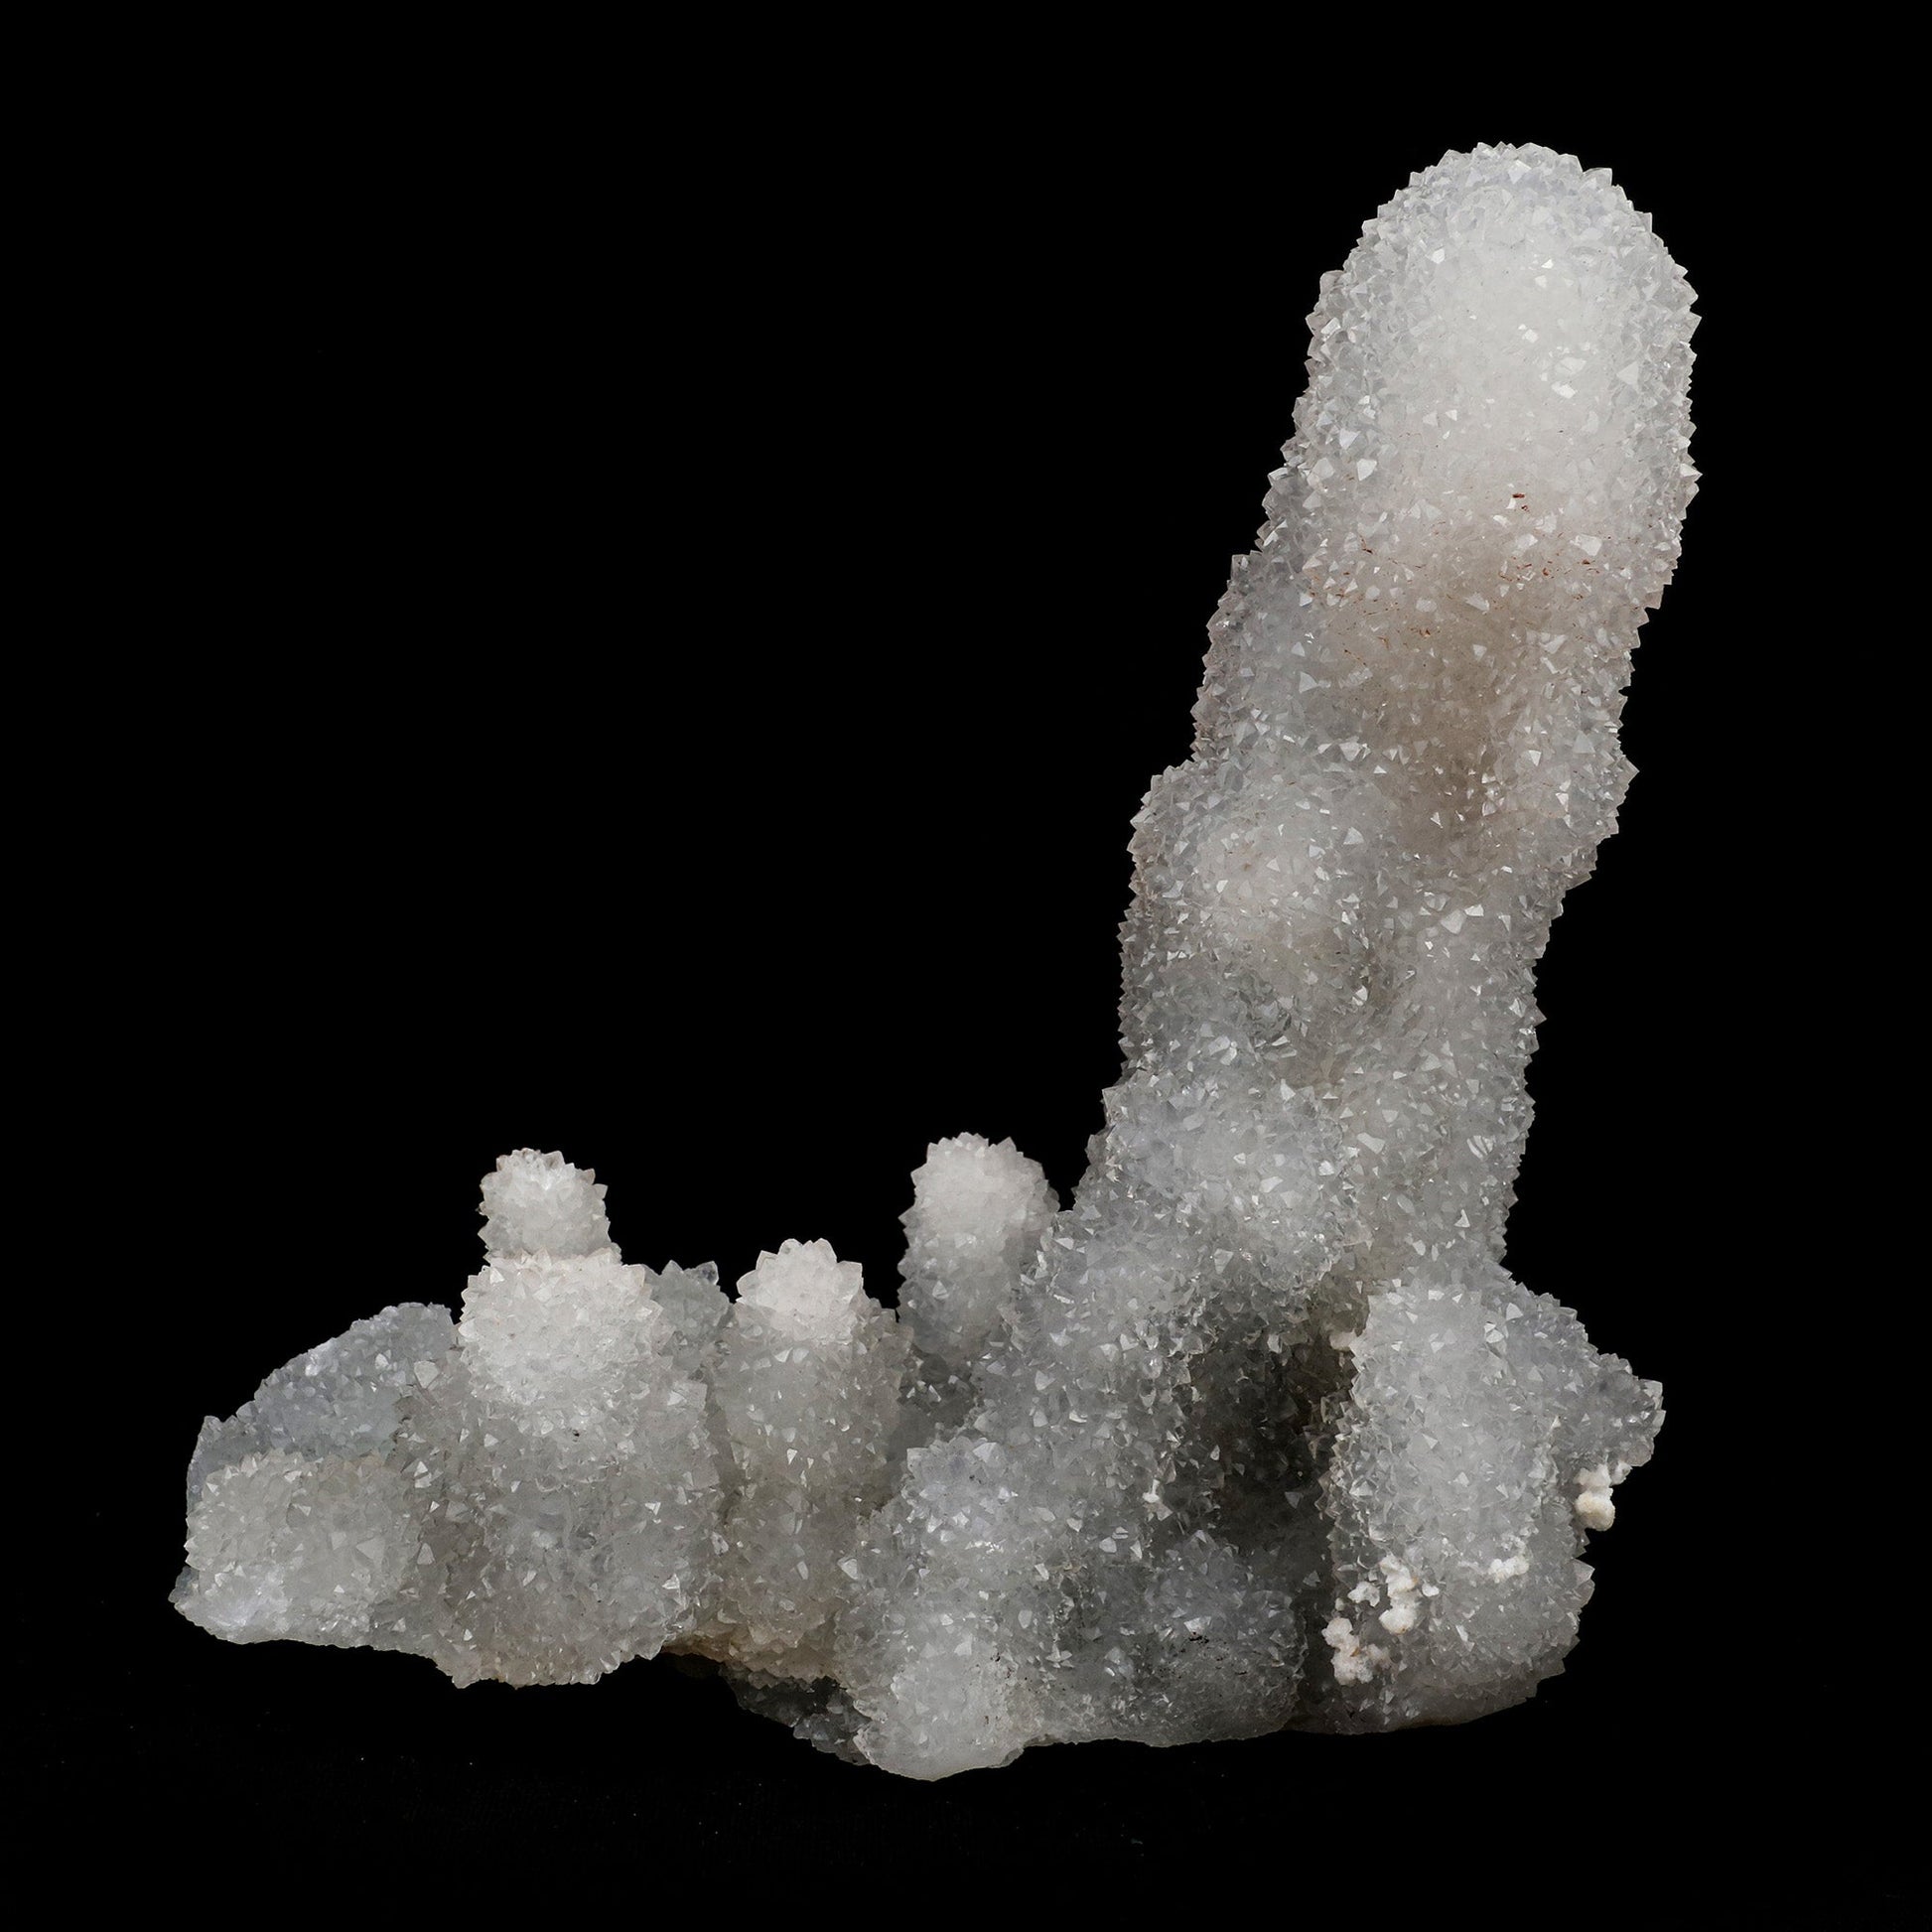 MM Quartz Coral Formation Natural Mineral Specimen # B 5164  https://www.superbminerals.us/products/mm-quartz-coral-formation-natural-mineral-specimen-b-5164  Features: The specimen is made up of drusy milky Quartz that has pseudomorphed following scalenohedral Calcite crystals.The item is crystallised nearly all the way around, with no matrix and only a few small points of attachment, and is thus on the verge of becoming a complete "floater."This type of specimen is quite